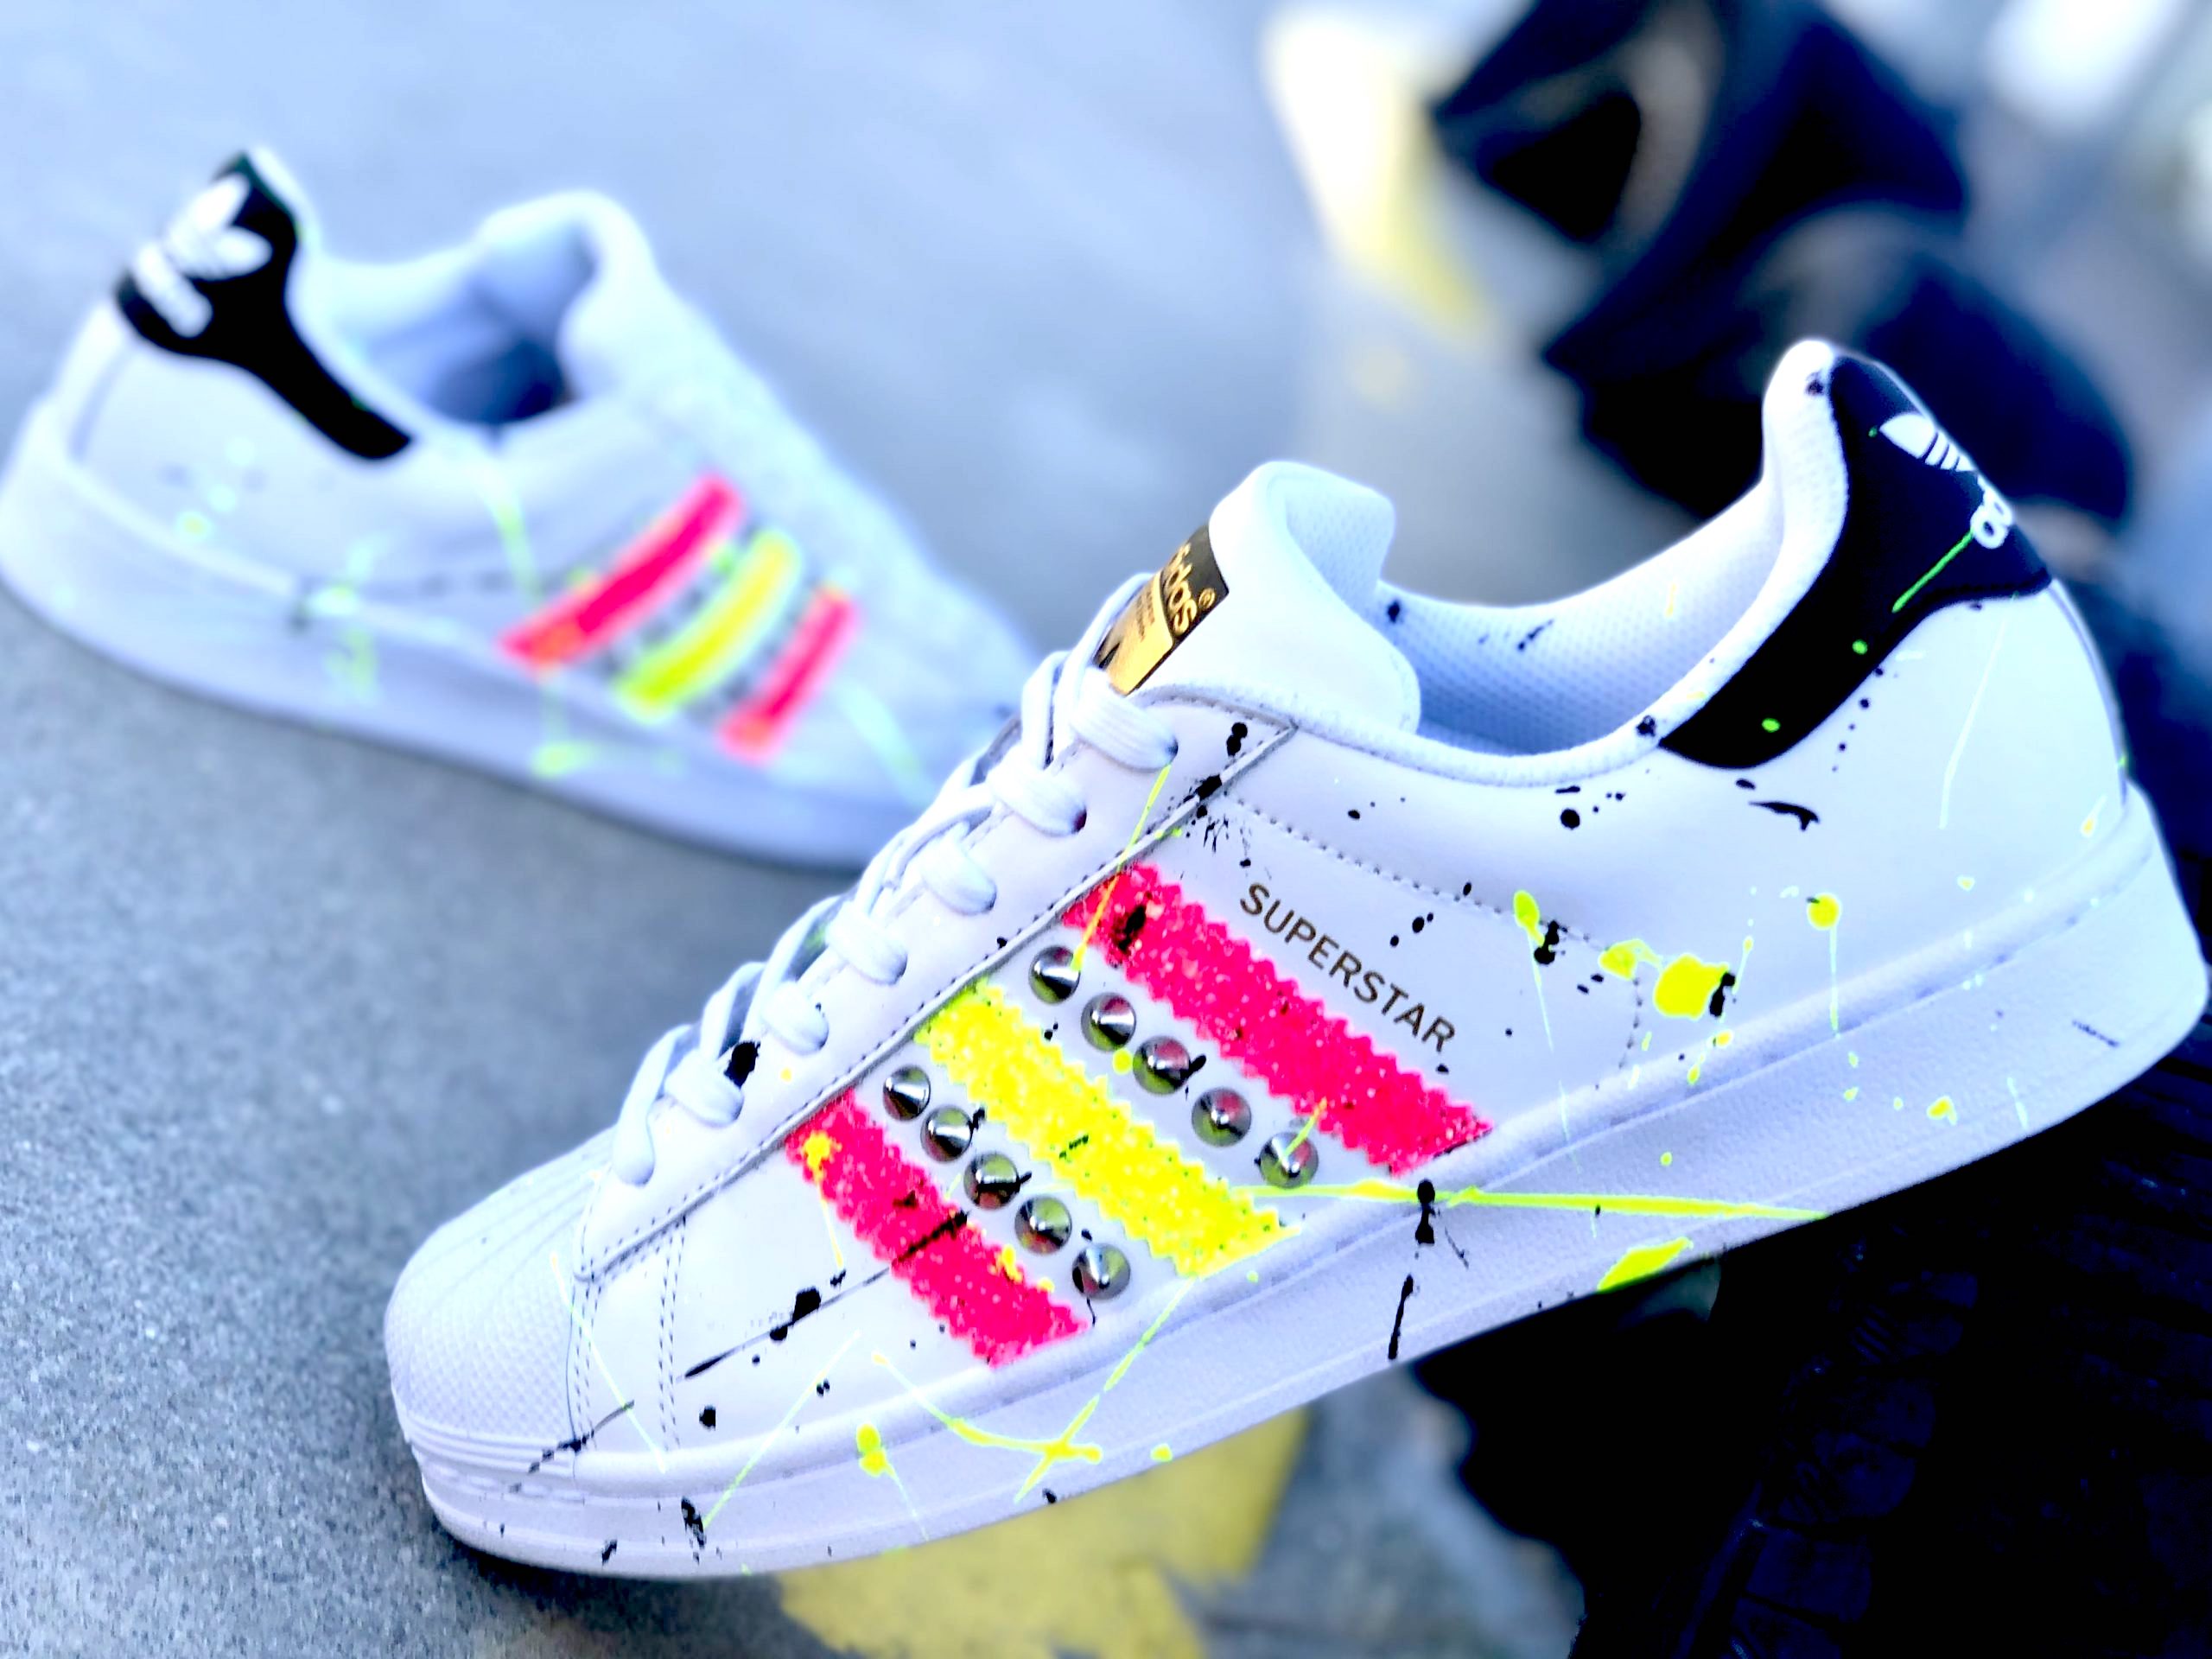 Adidas Superstar Personalizzate Fluo | Lillylab scarpe personalizzate